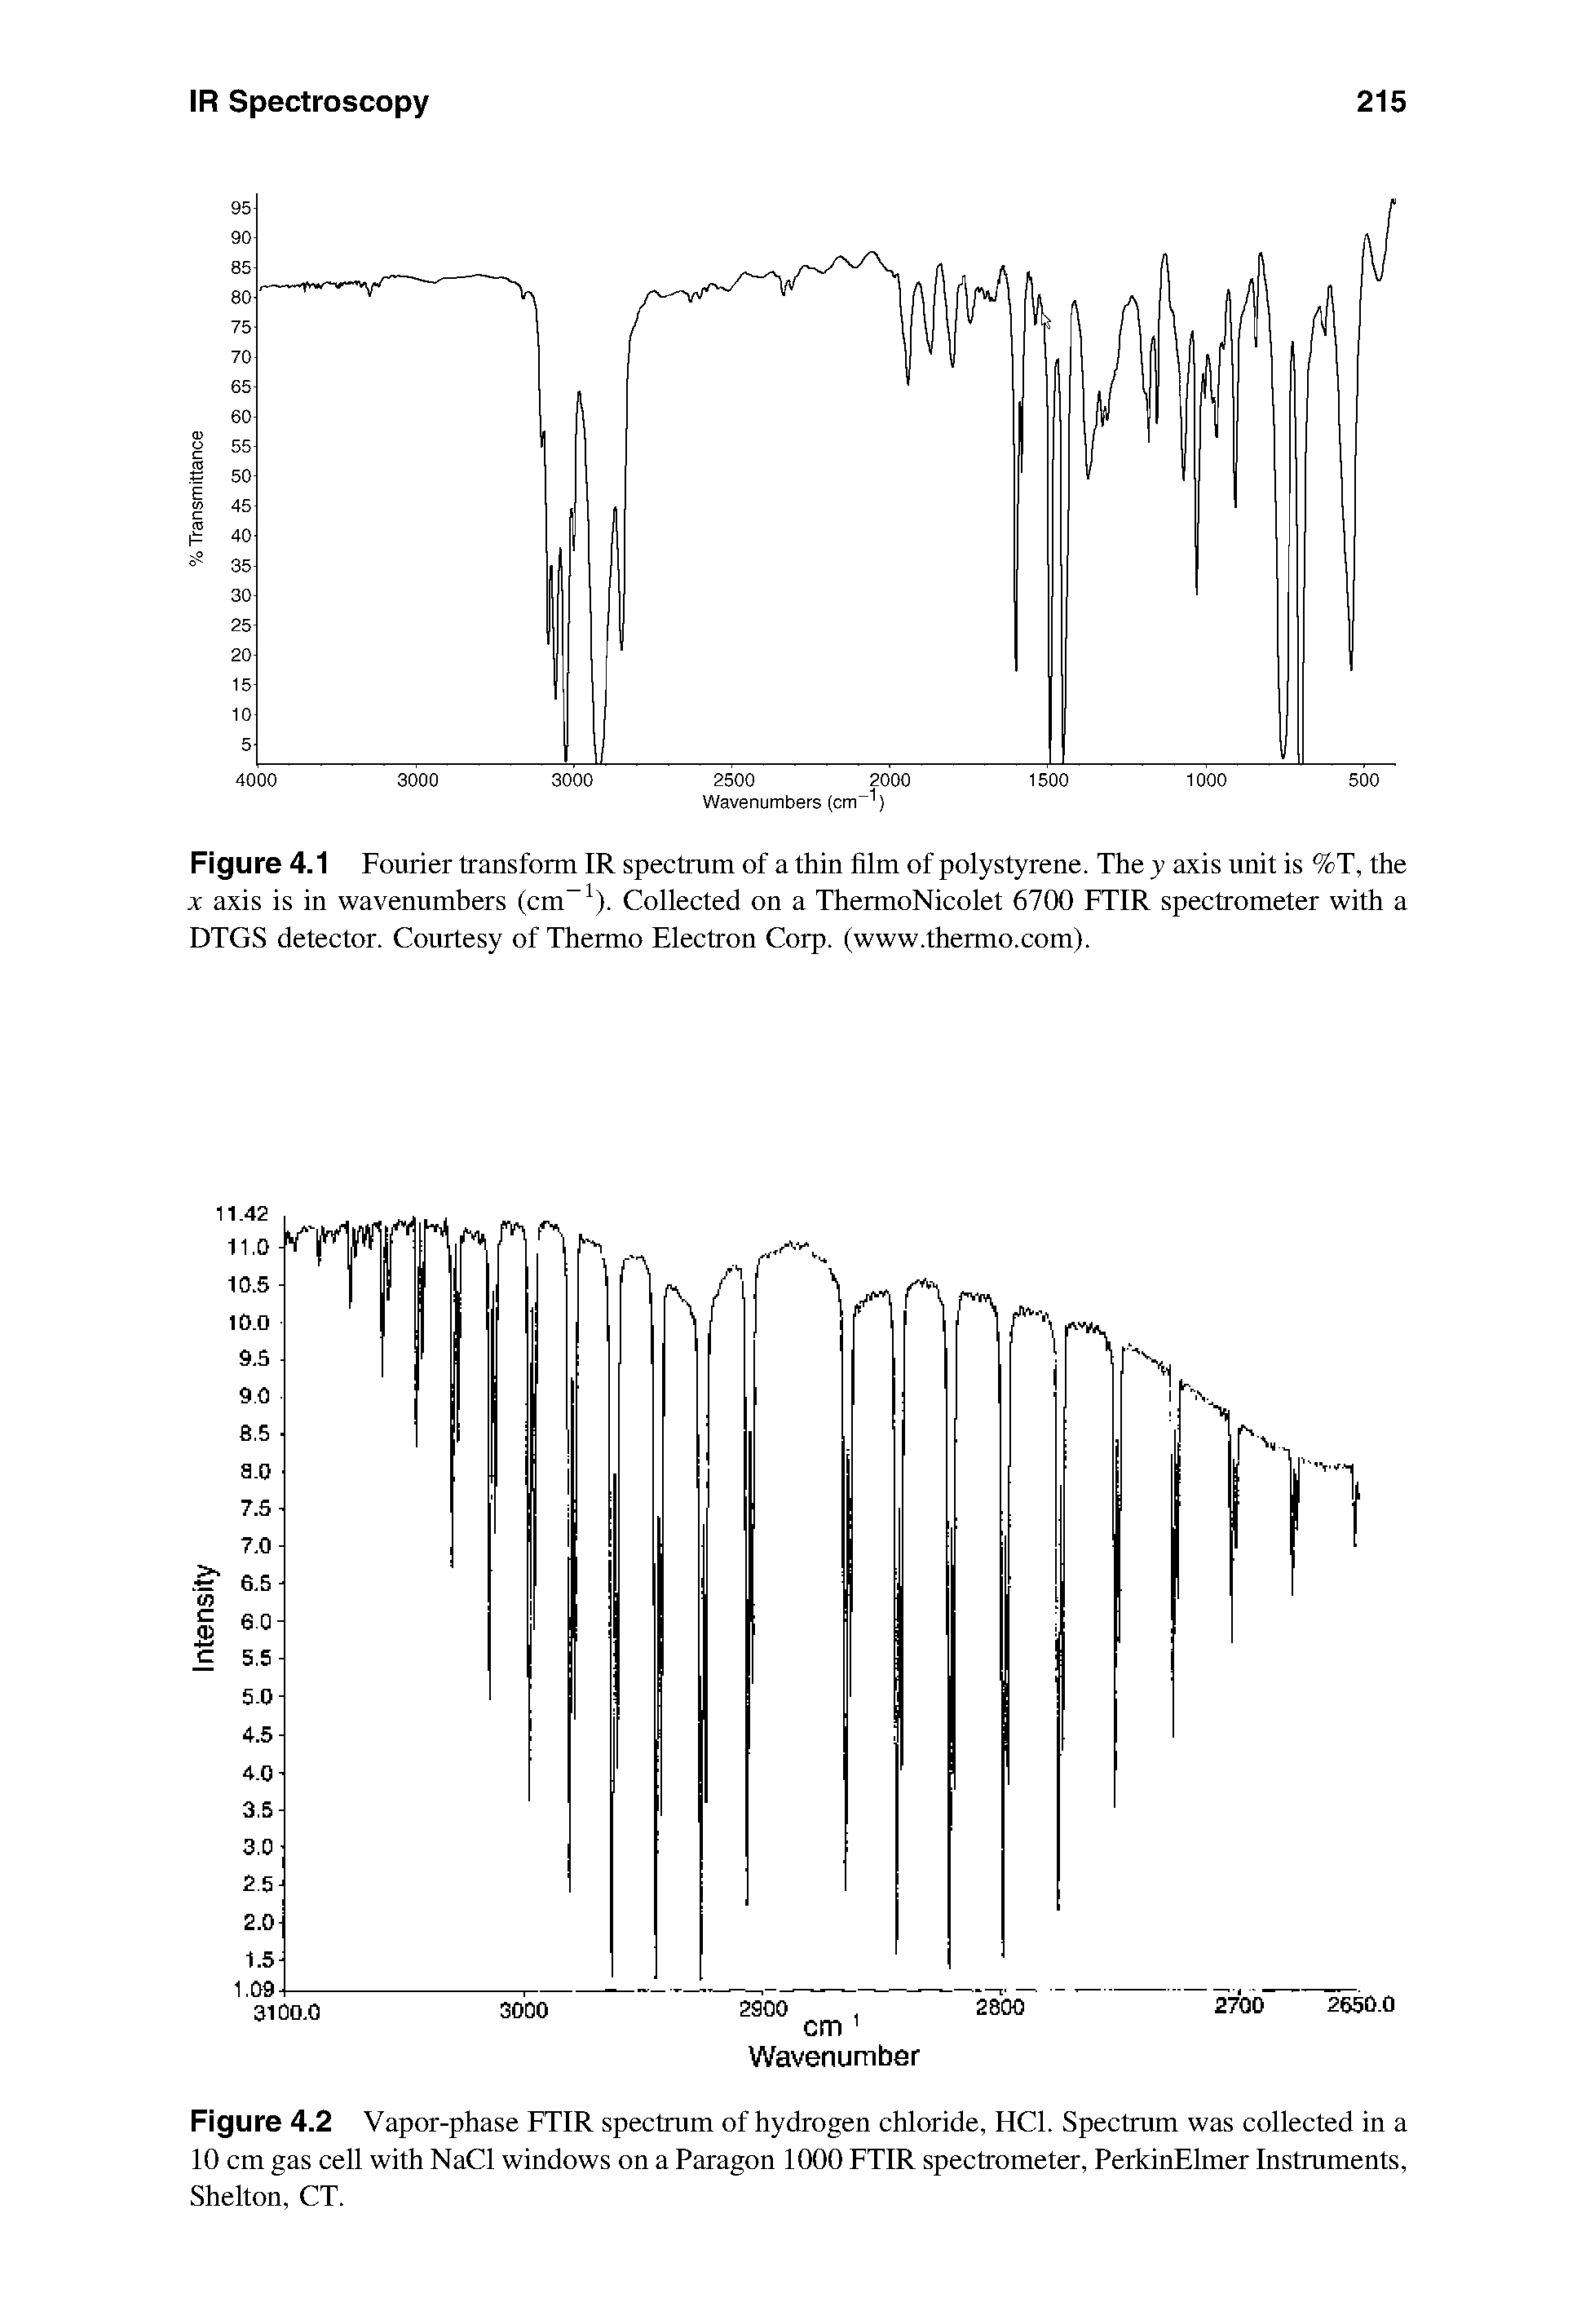 Figure 4.1 Fourier transform IR spectrum of a thin film of polystyrene. The y axis unit is %T, the X axis is in wavenumbers (cm ). Collected on a ThermoNicolet 6700 FTIR spectrometer with a DTGS detector. Courtesy of Thermo Electron Corp. (www.themio.com).